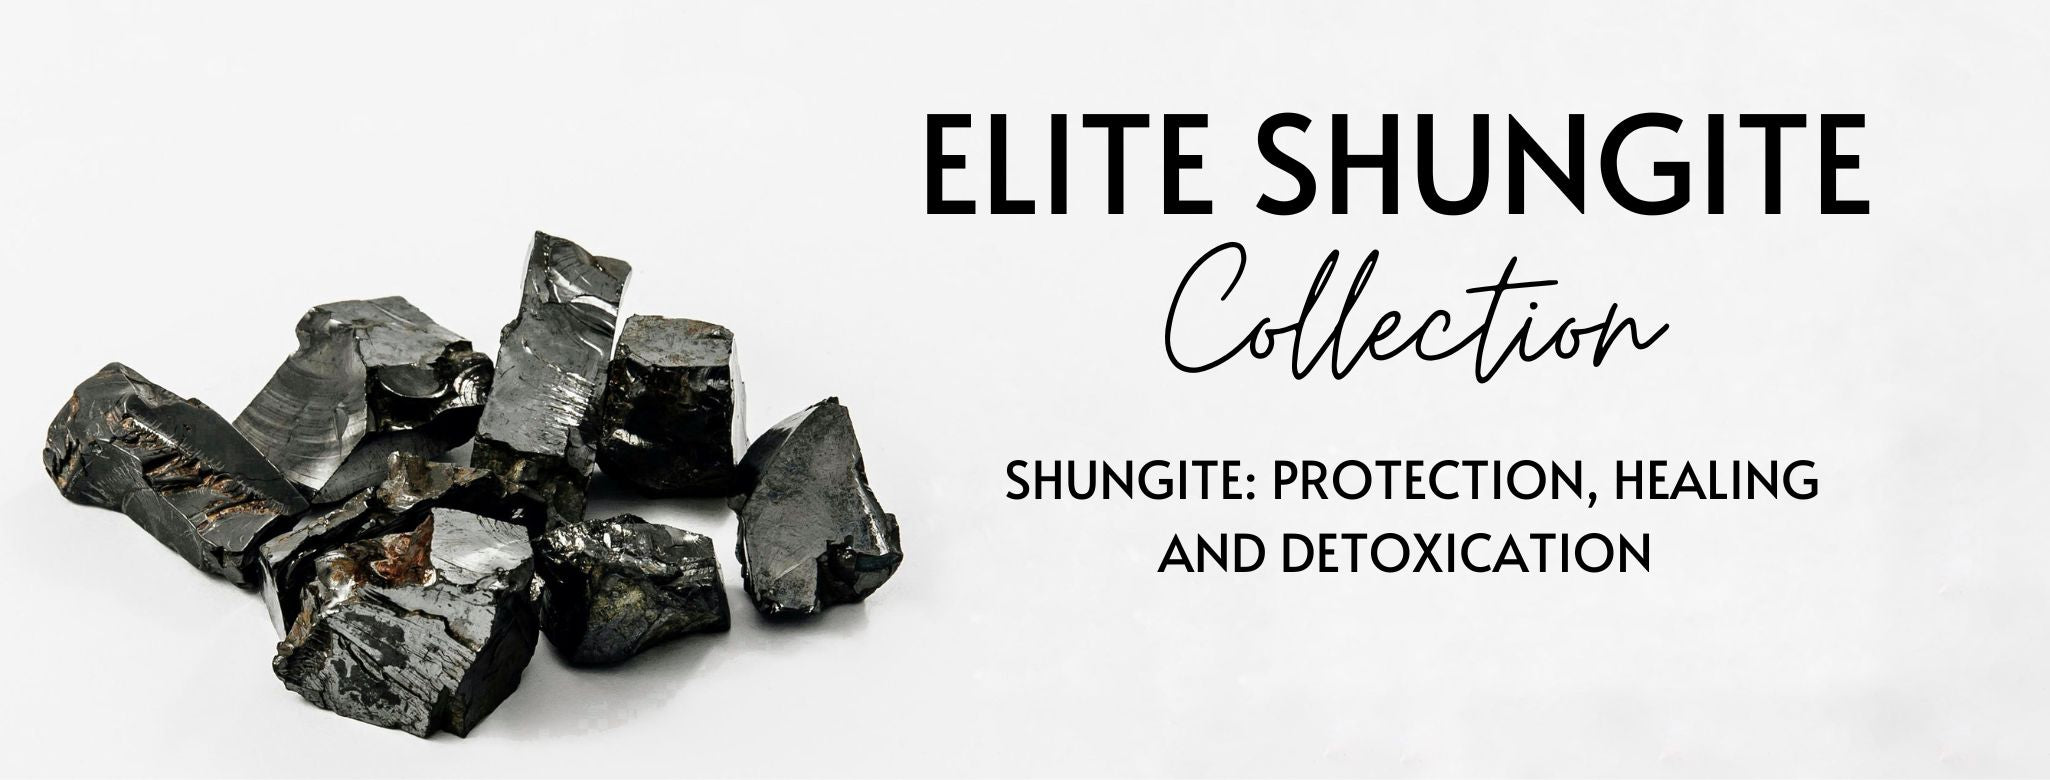 What is the best way to use Elite Shungite? - Elite Shungite Properties - MagicCrystals.com